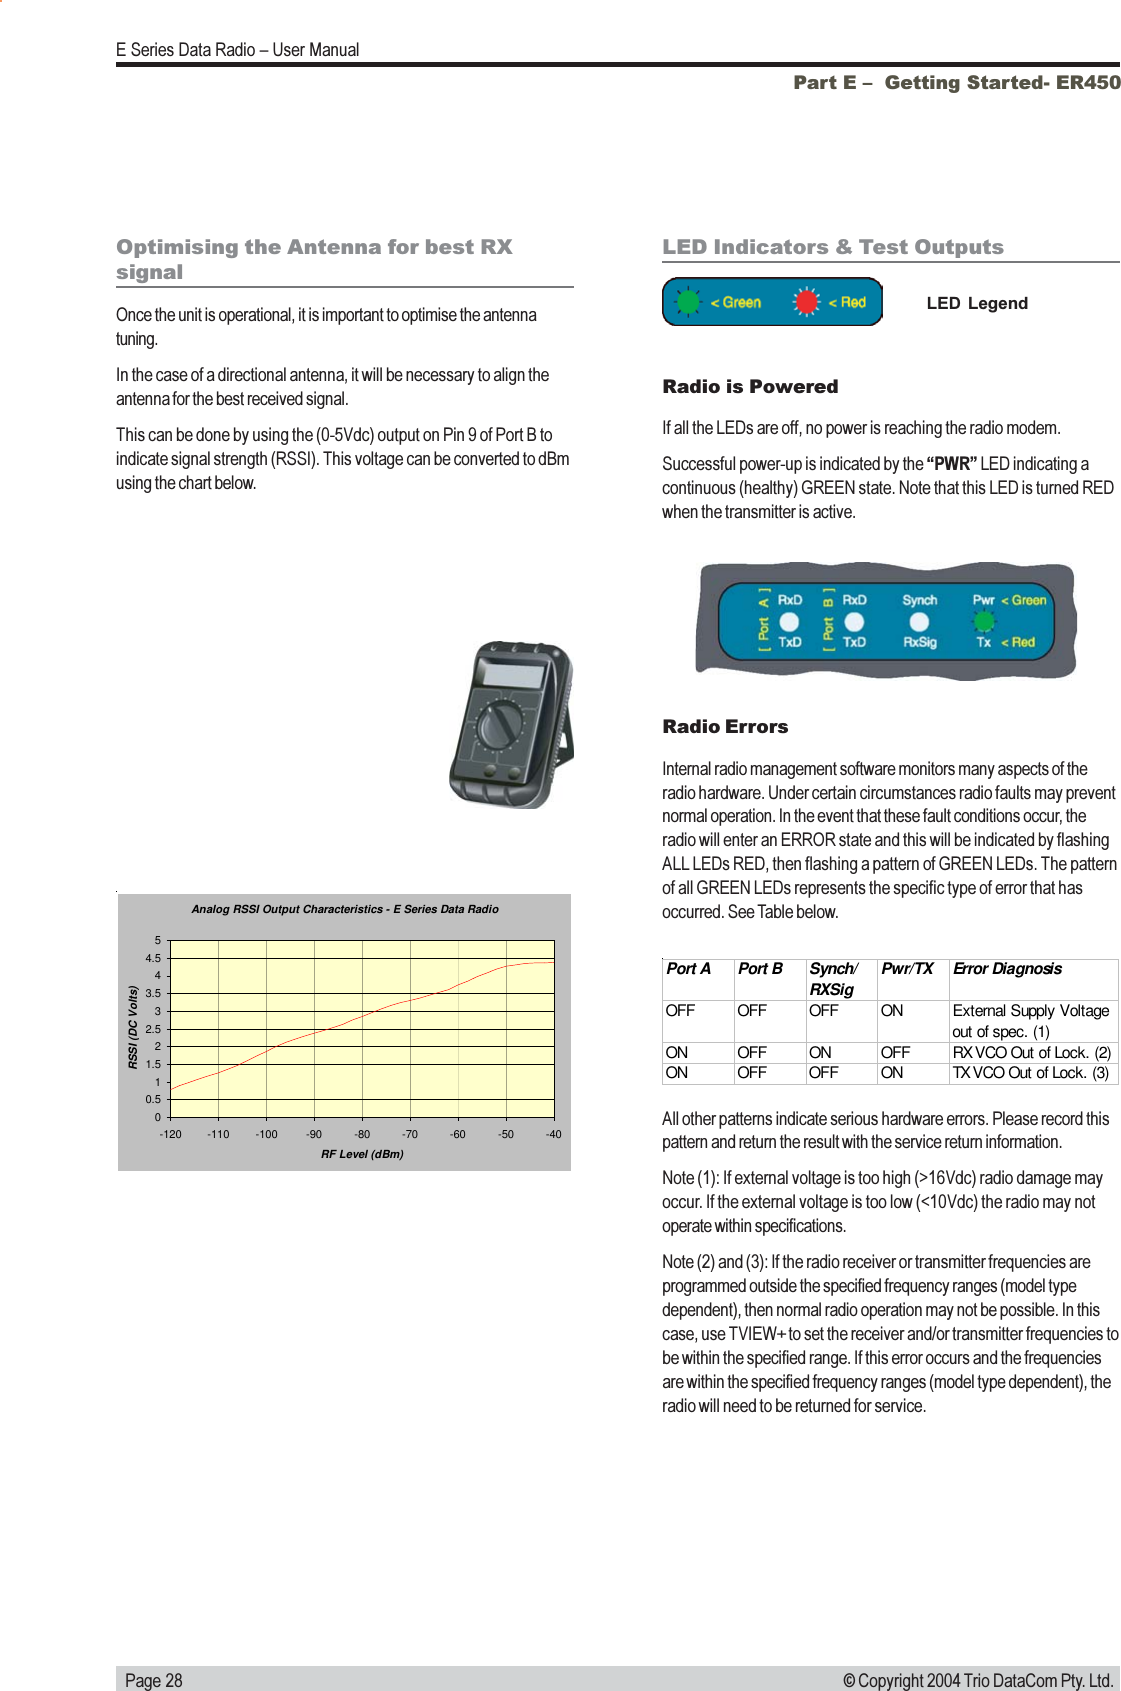   Page 28E Series Data Radio  User Manual© Copyright 2004 Trio DataCom Pty. Ltd.Optimising the Antenna for best RXsignalOnce the unit is operational, it is important to optimise the antennatuning.In the case of a directional antenna, it will be necessary to align theantenna for the best received signal.This can be done by using the (0-5Vdc) output on Pin 9 of Port B toindicate signal strength (RSSI). This voltage can be converted to dBmusing the chart below.LED Indicators &amp; Test OutputsRadio is PoweredIf all the LEDs are off, no power is reaching the radio modem.Successful power-up is indicated by the PWR LED indicating acontinuous (healthy) GREEN state. Note that this LED is turned REDwhen the transmitter is active.LED  LegendAnalog RSSI Output Characteristics - E Series Data Radio00.511.522.533.544.55-120 -110 -100 -90 -80 -70 -60 -50 -40RF Level (dBm)RSSI (DC Volts)Part E   Getting Started- ER450Radio ErrorsInternal radio management software monitors many aspects of theradio hardware. Under certain circumstances radio faults may preventnormal operation. In the event that these fault conditions occur, theradio will enter an ERROR state and this will be indicated by flashingALL LEDs RED, then flashing a pattern of GREEN LEDs. The patternof all GREEN LEDs represents the specific type of error that hasoccurred. See Table below.Port APort BSynch/ RXSigPwr/TX Error DiagnosisOFF OFF OFF ON External Supply Voltageout of spec. (1)ON OFF ON OFF RX VCO Out of Lock. (2)ON OFF OFF ON TX VCO Out of Lock. (3)All other patterns indicate serious hardware errors. Please record thispattern and return the result with the service return information.Note (1): If external voltage is too high (&gt;16Vdc) radio damage mayoccur. If the external voltage is too low (&lt;10Vdc) the radio may notoperate within specifications.Note (2) and (3): If the radio receiver or transmitter frequencies areprogrammed outside the specified frequency ranges (model typedependent), then normal radio operation may not be possible. In thiscase, use TVIEW+ to set the receiver and/or transmitter frequencies tobe within the specified range. If this error occurs and the frequenciesare within the specified frequency ranges (model type dependent), theradio will need to be returned for service.